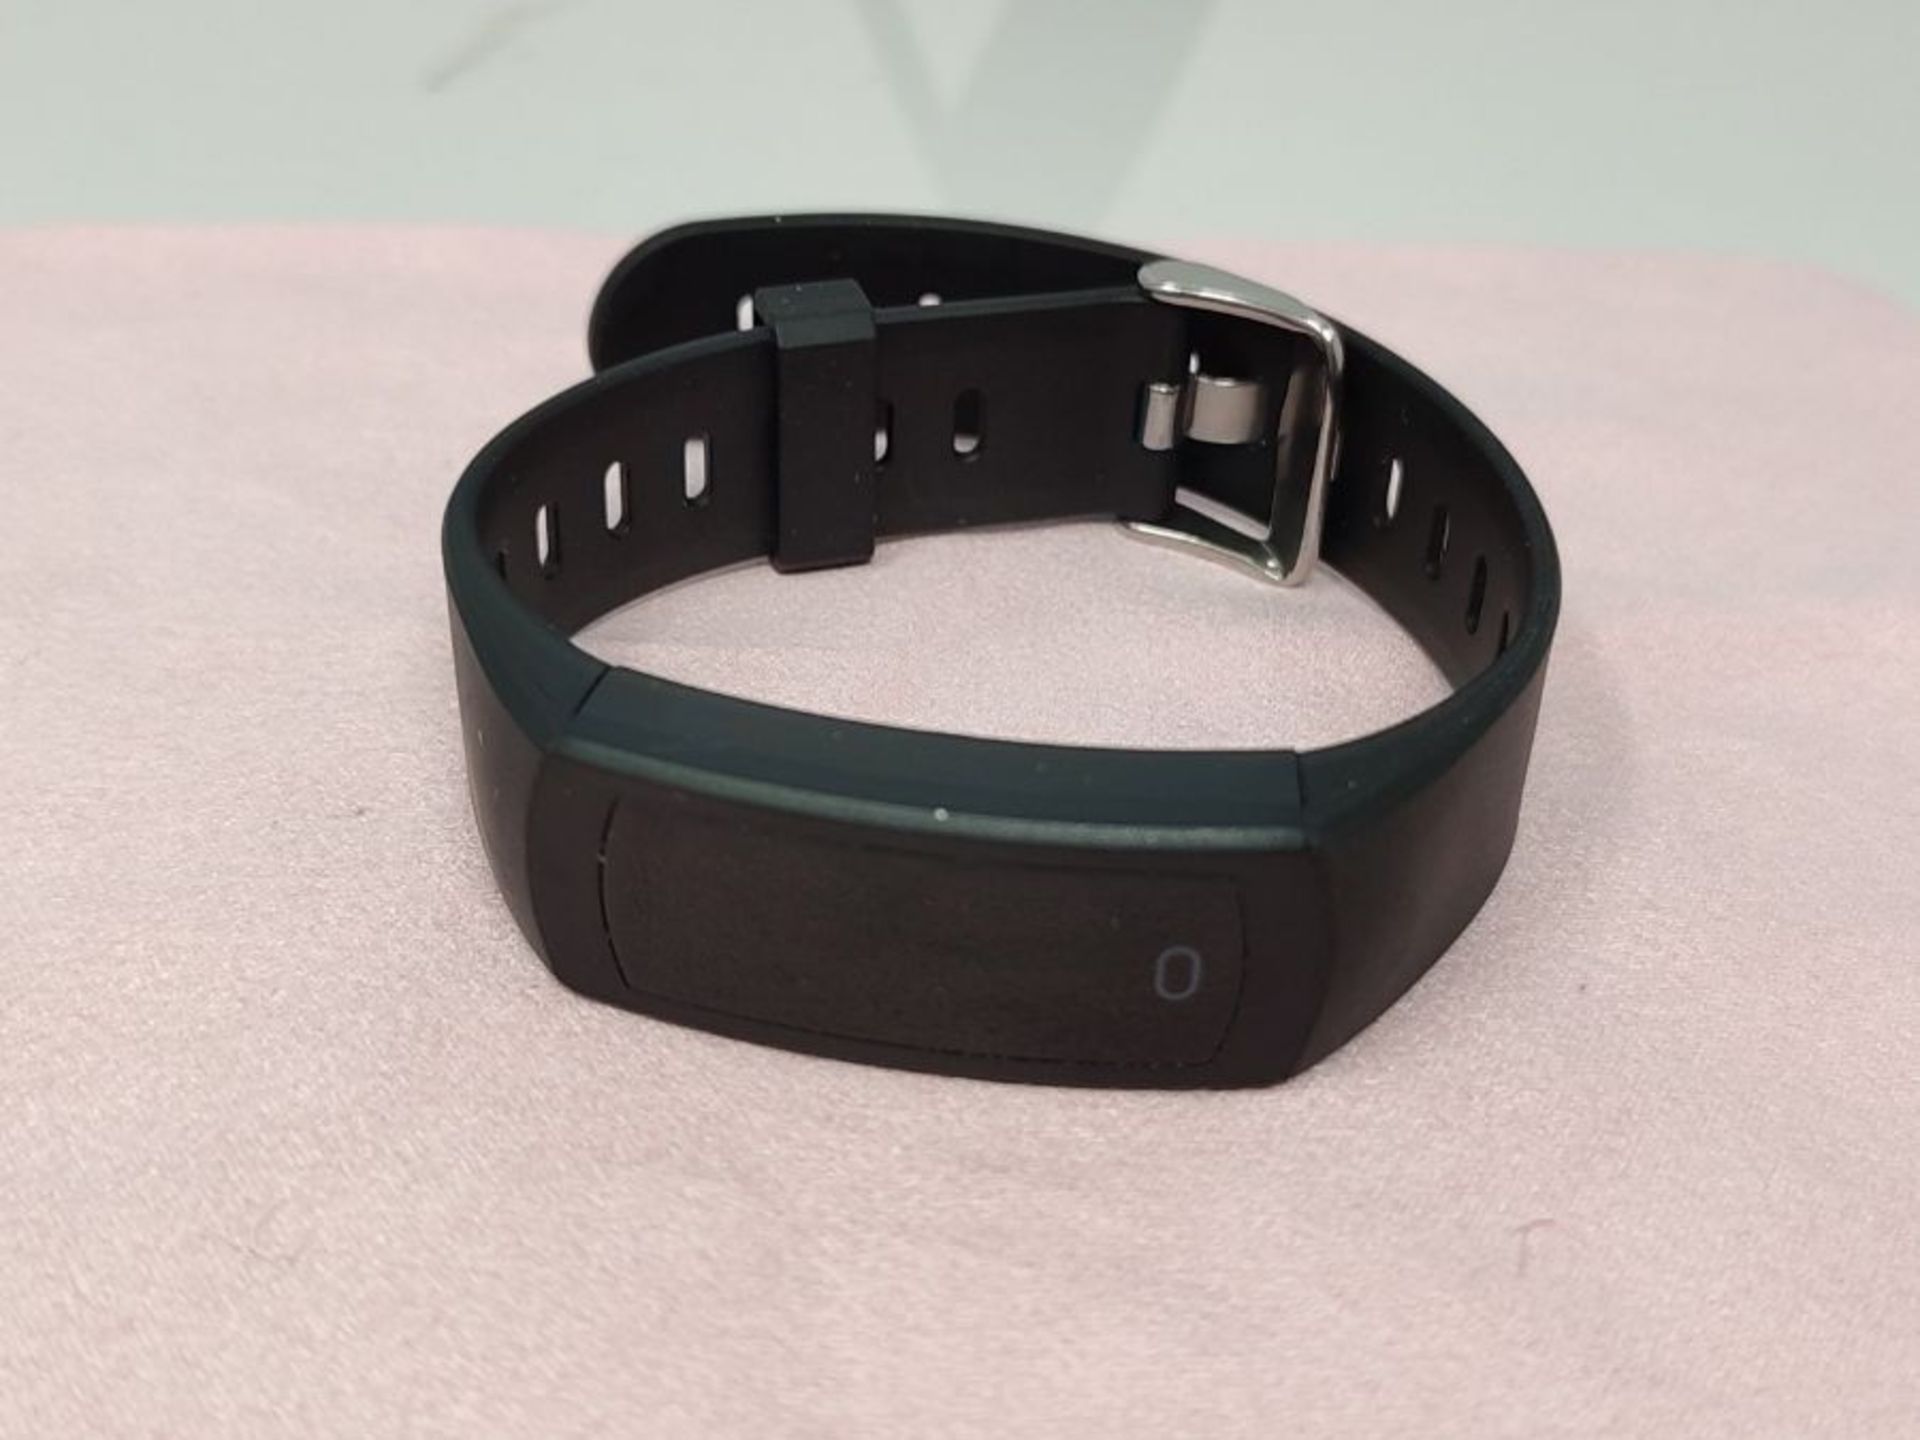 novasmart - runR ONE Fitness Tracker, Activity Tracker, Smart Band with Colour Display - Image 3 of 3